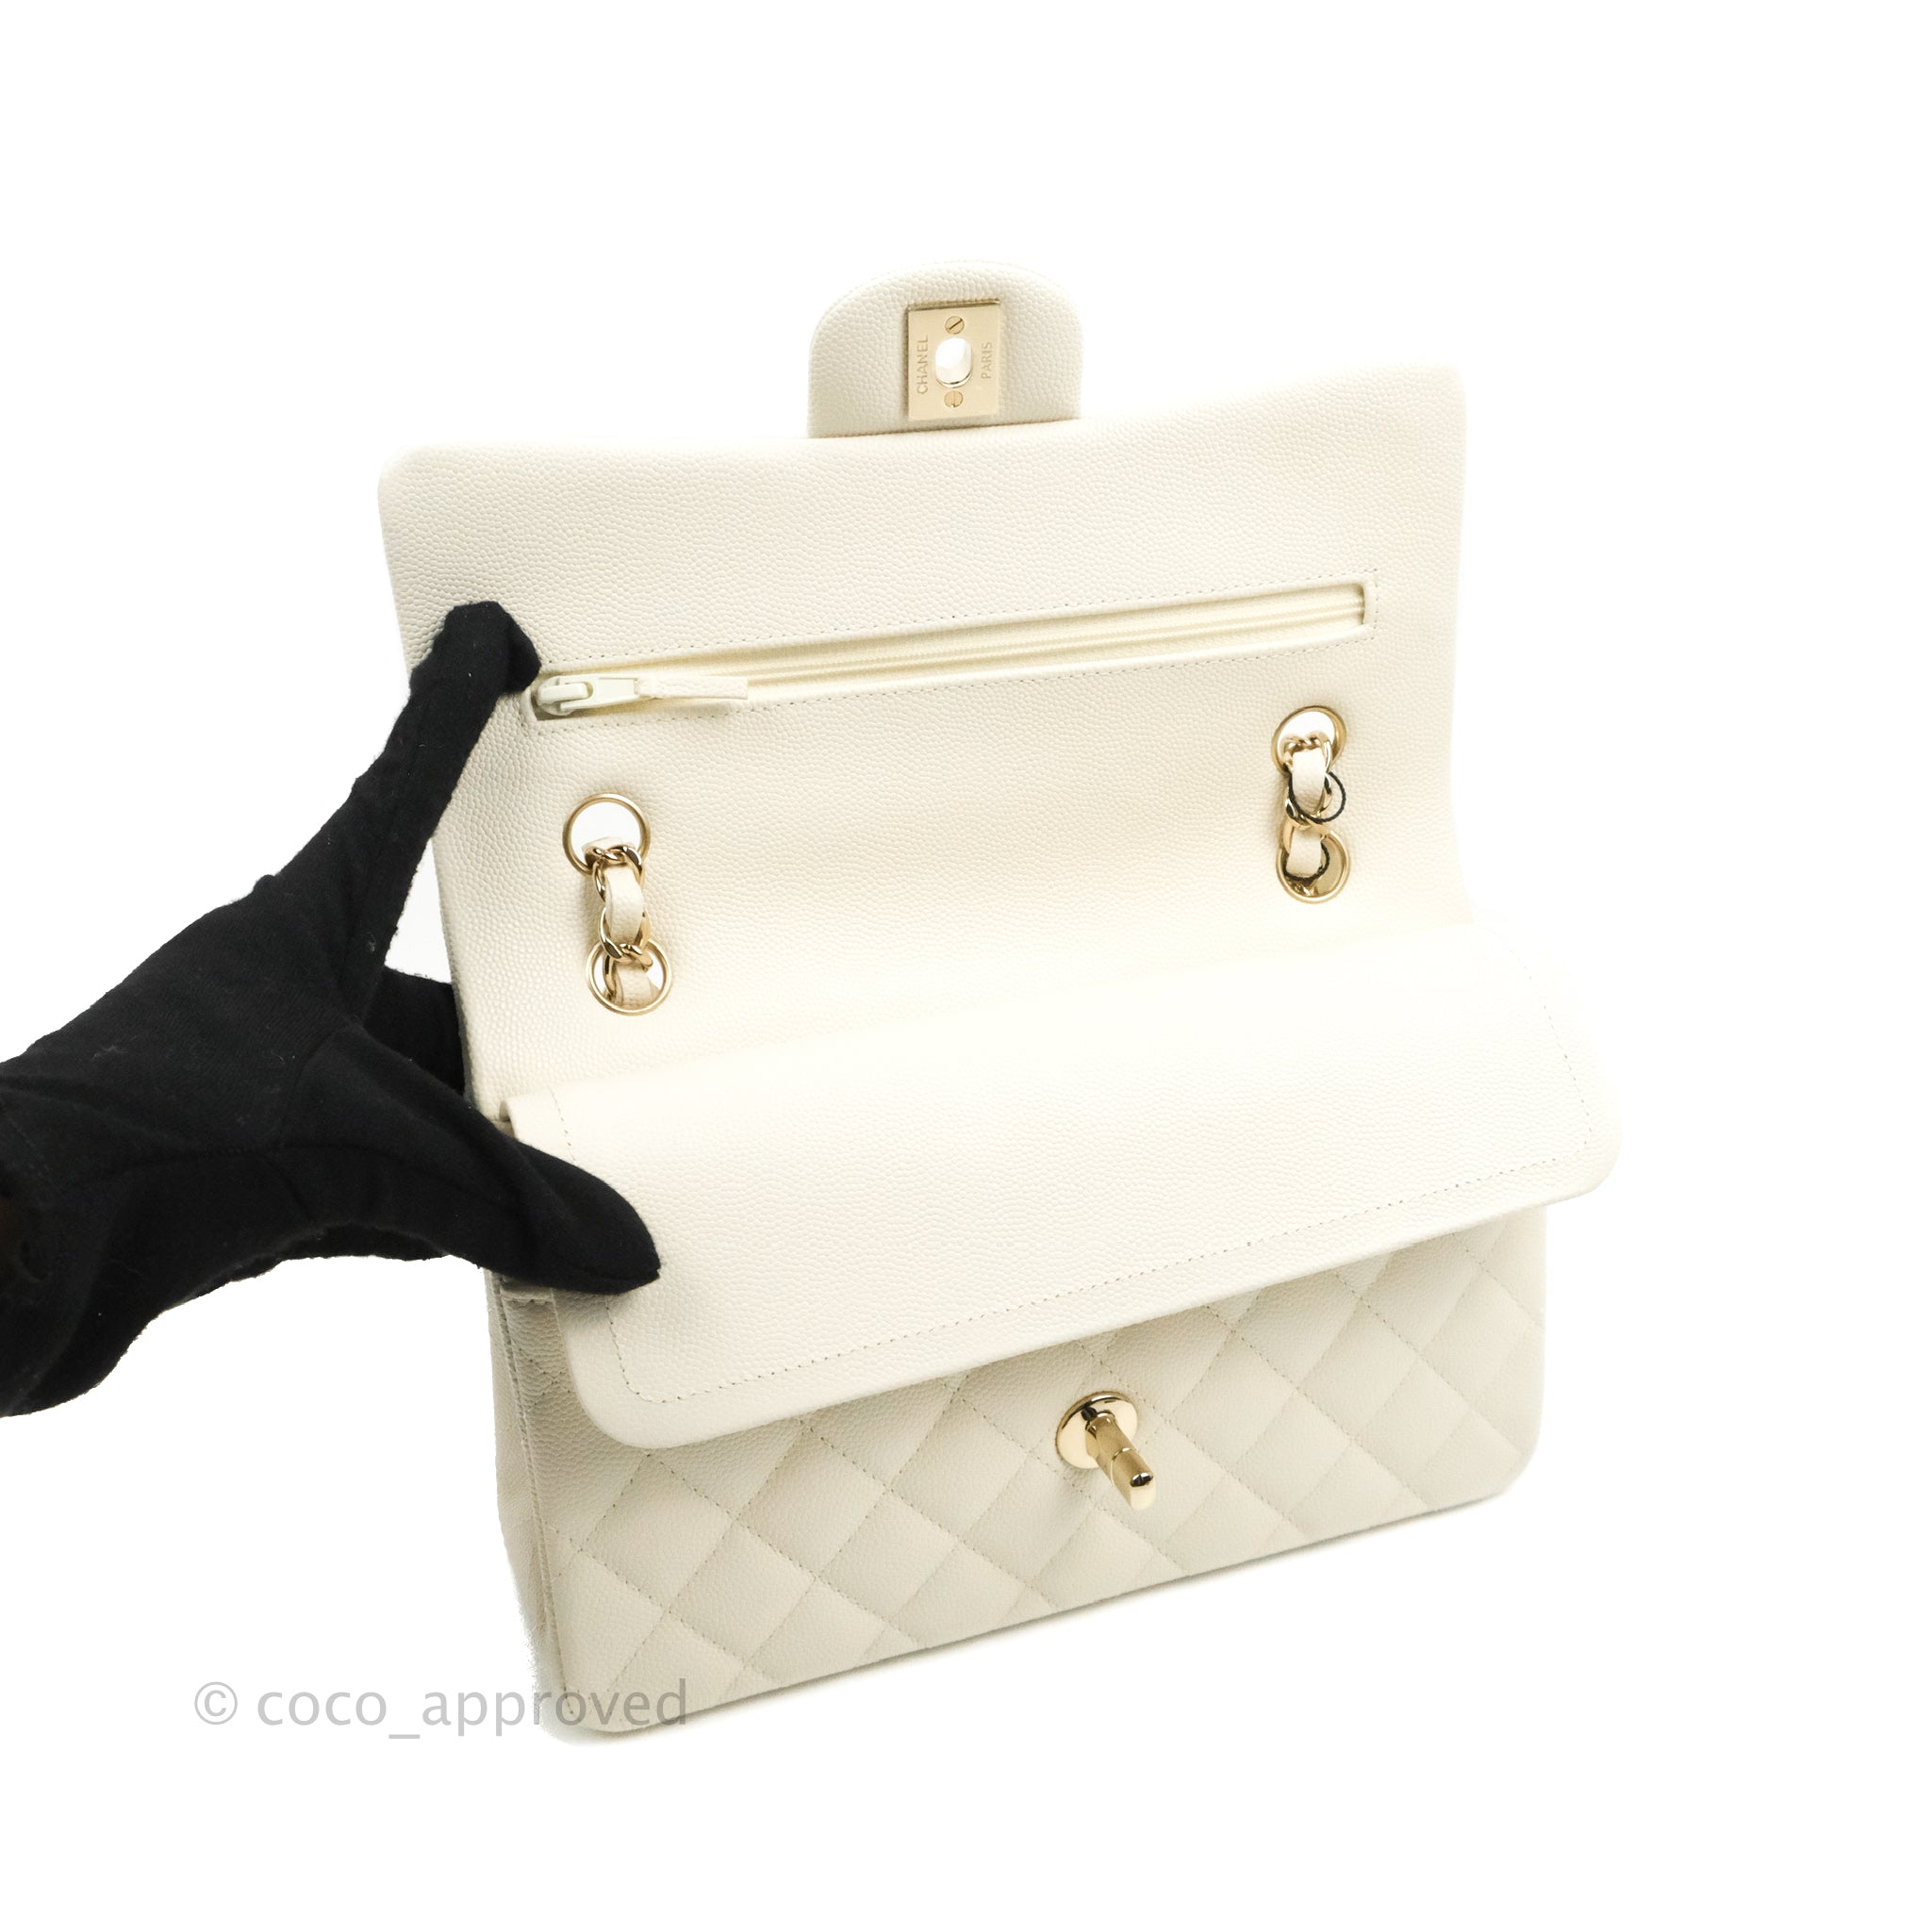 White Quilted Caviar Small Flap Bag Gold Hardware, 2022